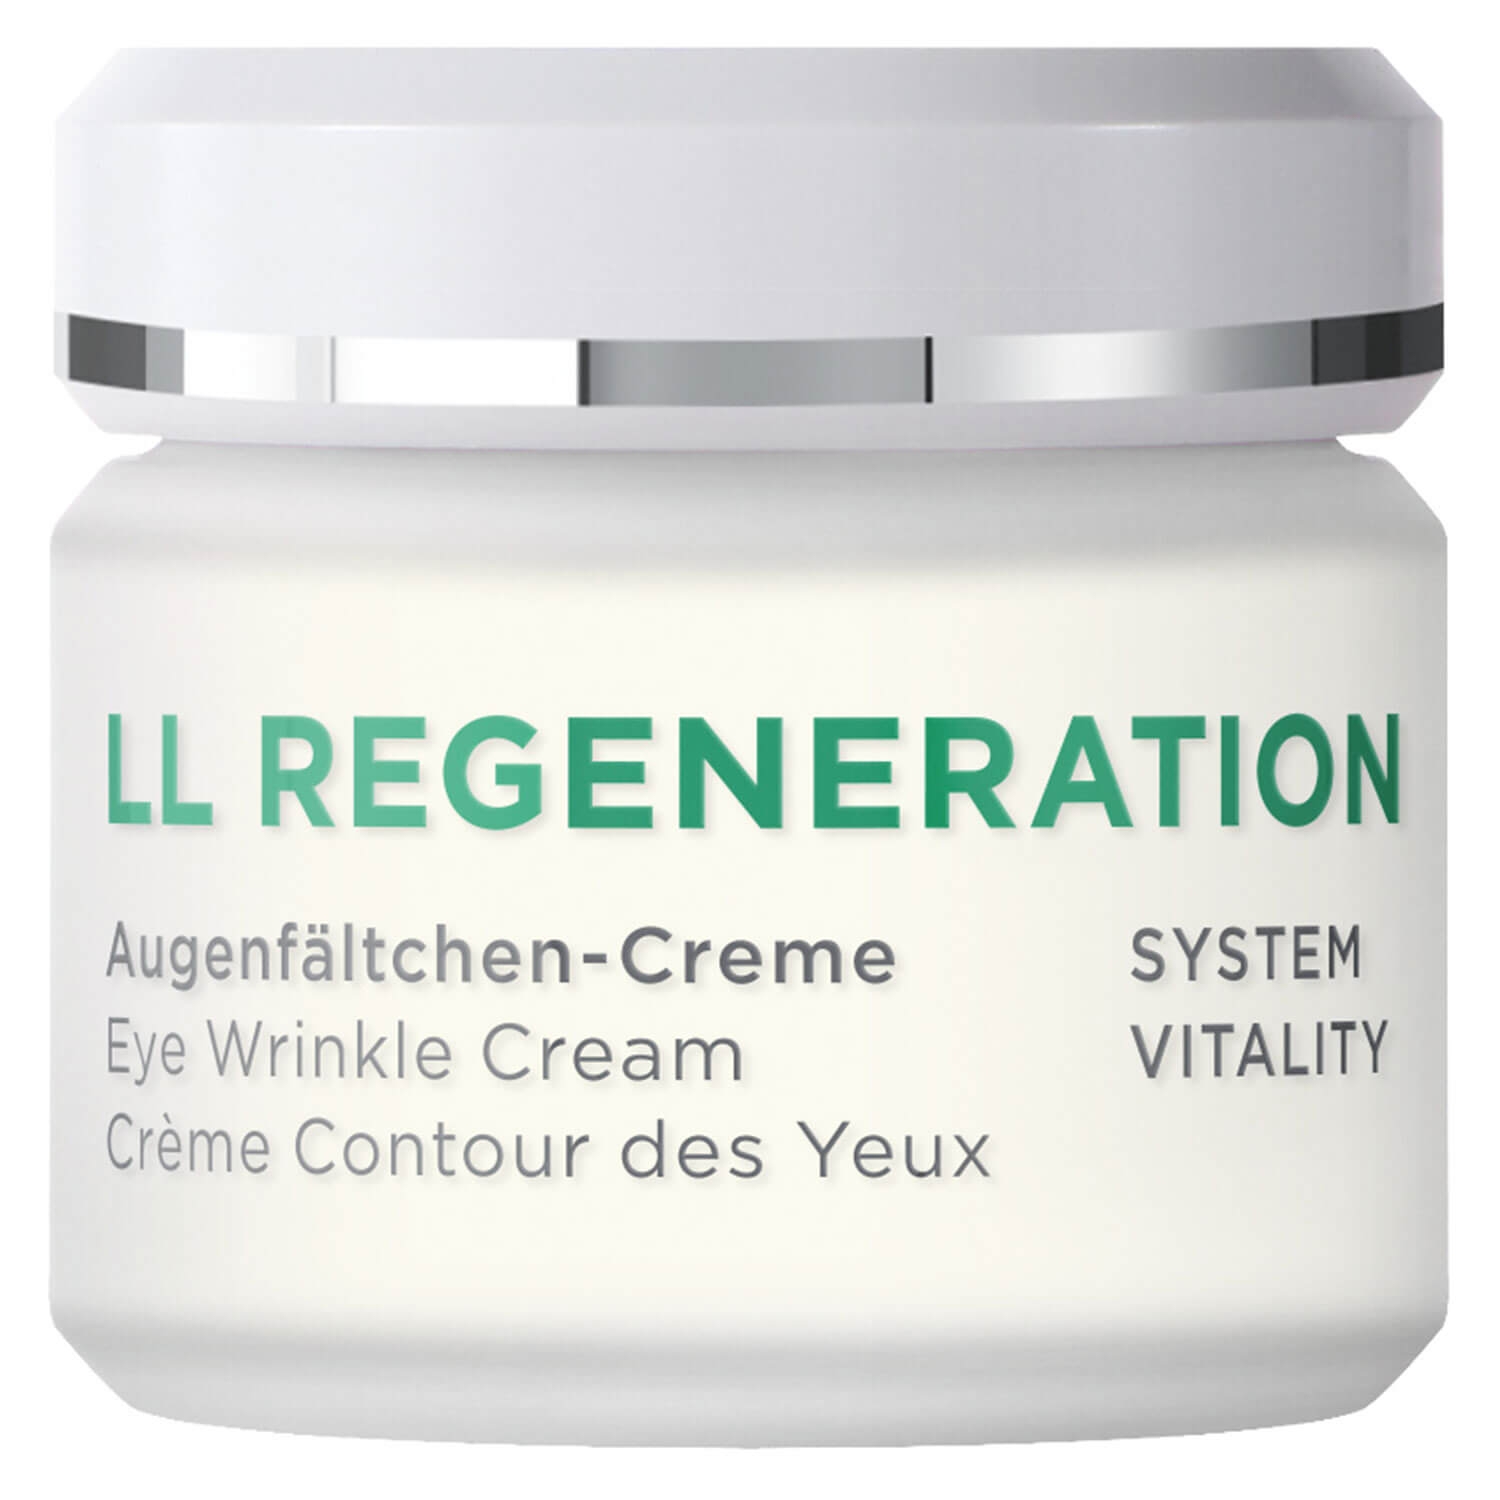 Product image from LL Regeneration - Augenfältchen-Creme